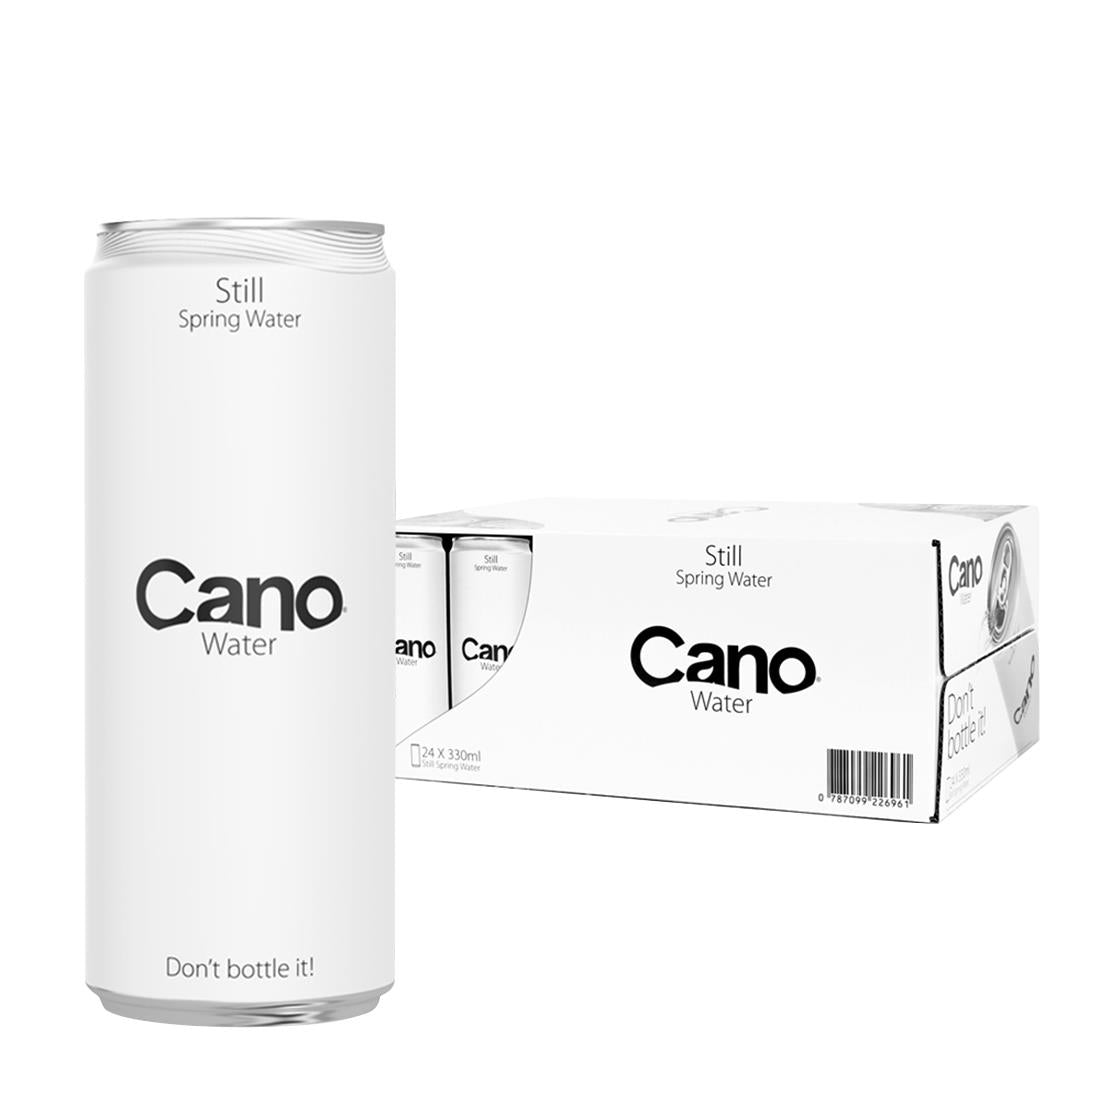 FU936 Cano Still Water Cans 330ml (Pack of 24)